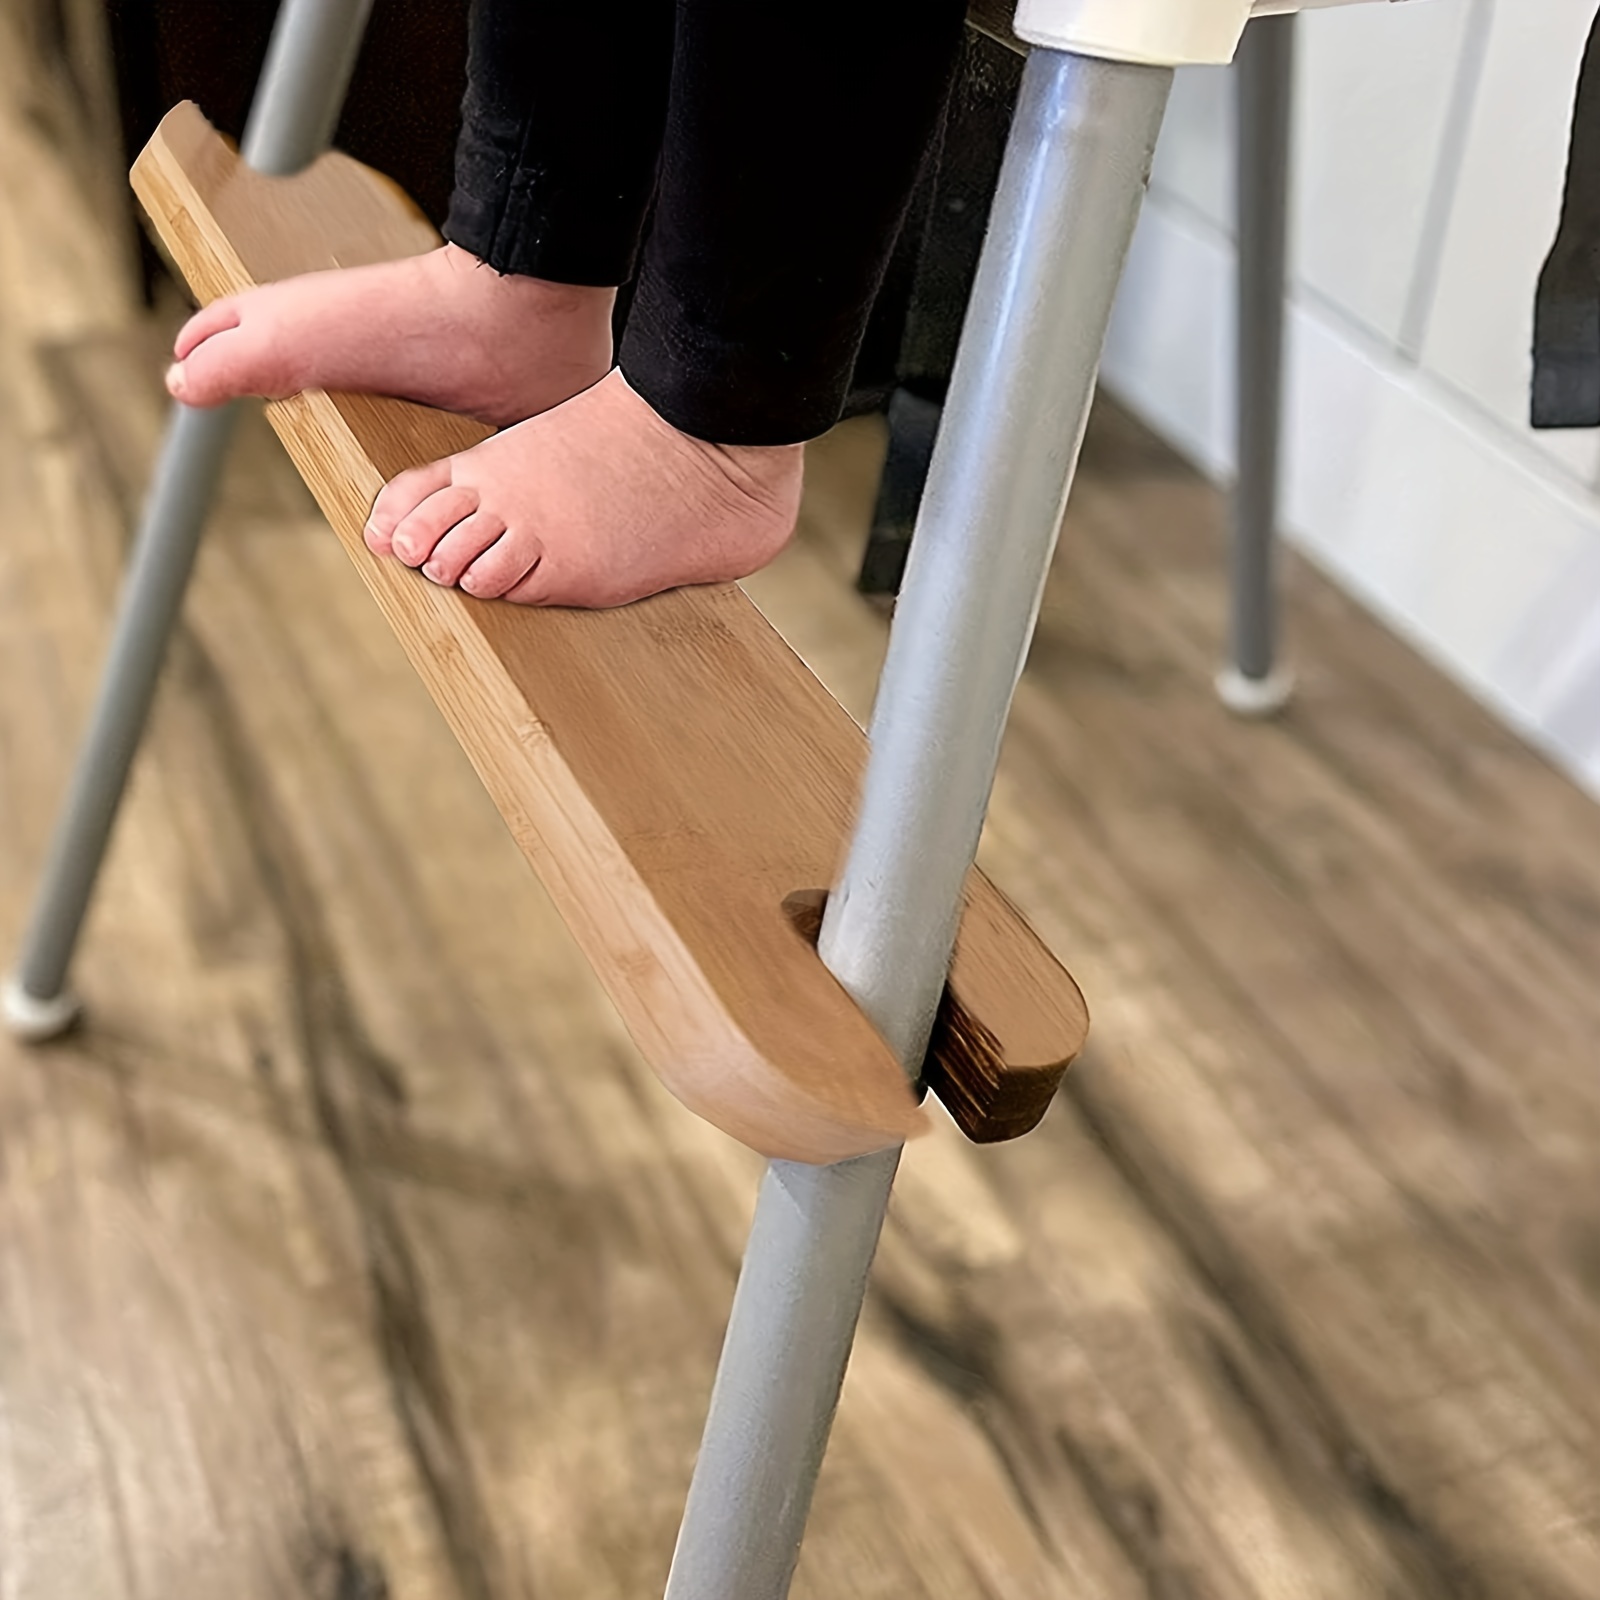 Adjustable Bamboo Footrest for Ikea Antilop High Chair 